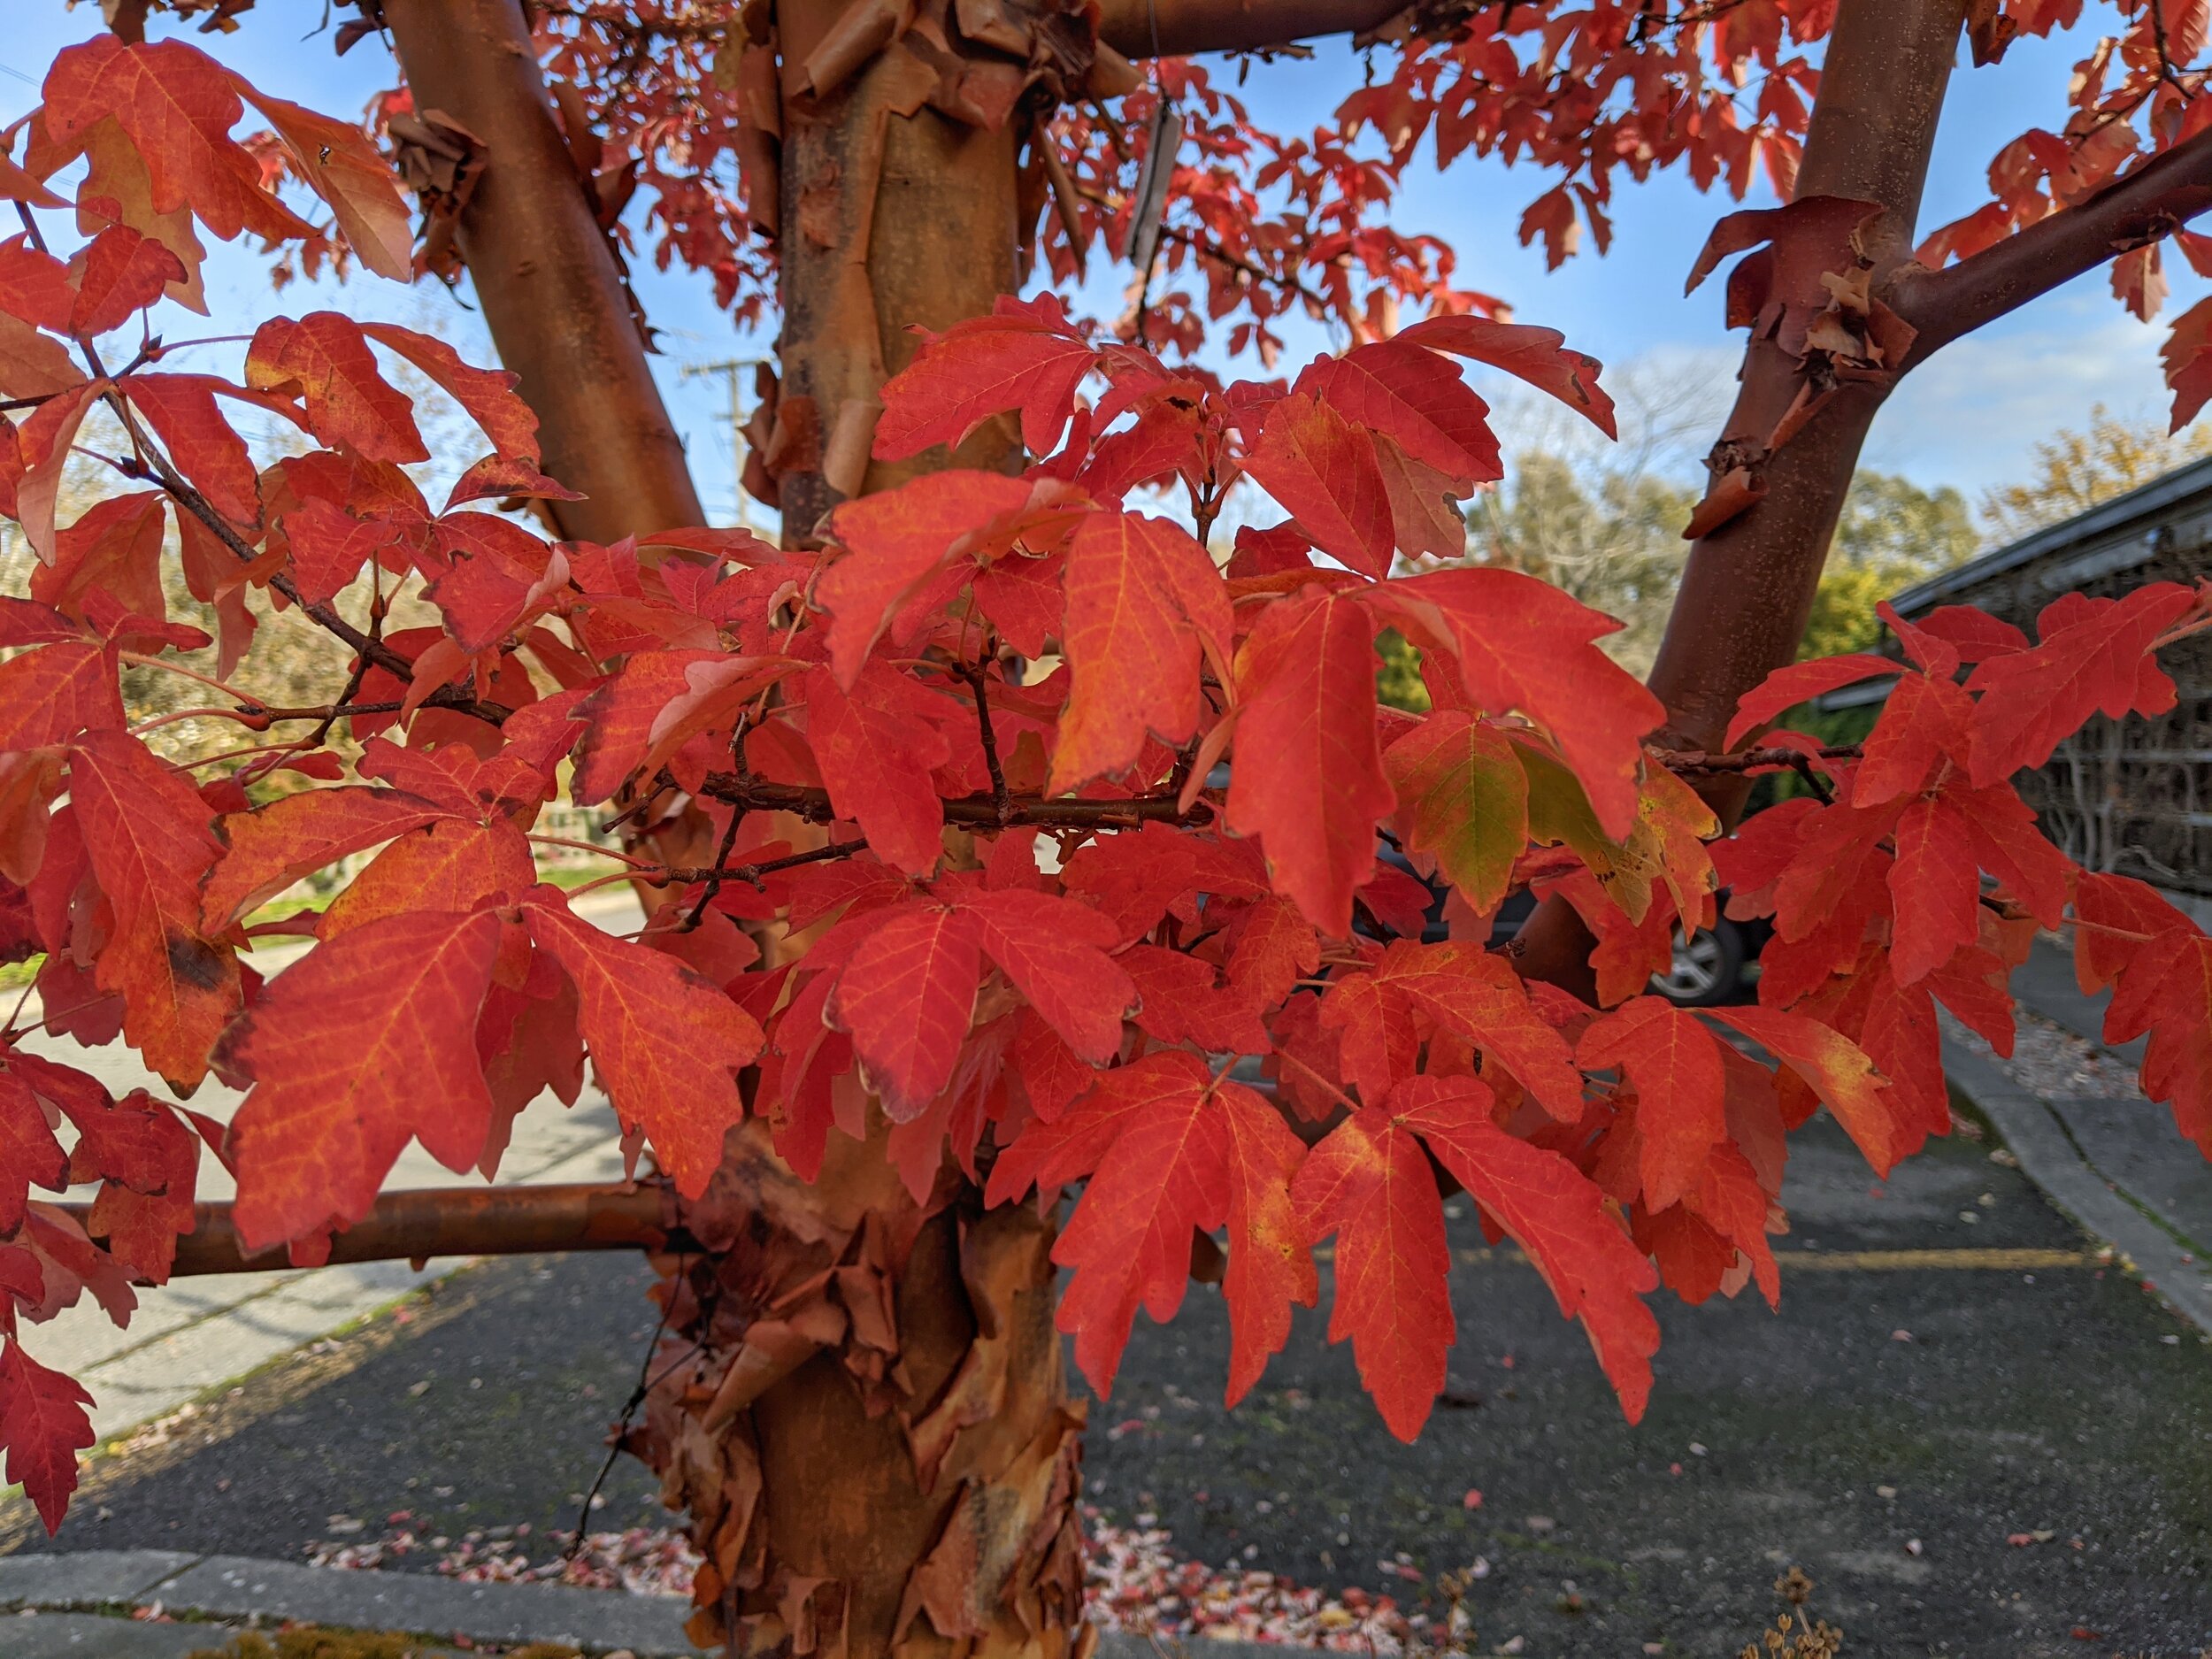 Paperbark maple foliage, in summer and fall. (photos: left, in the Seattle Japanese Garden, by Tony Monk; right, at the Center for Urban Horticulture, by Corinne Kennedy)